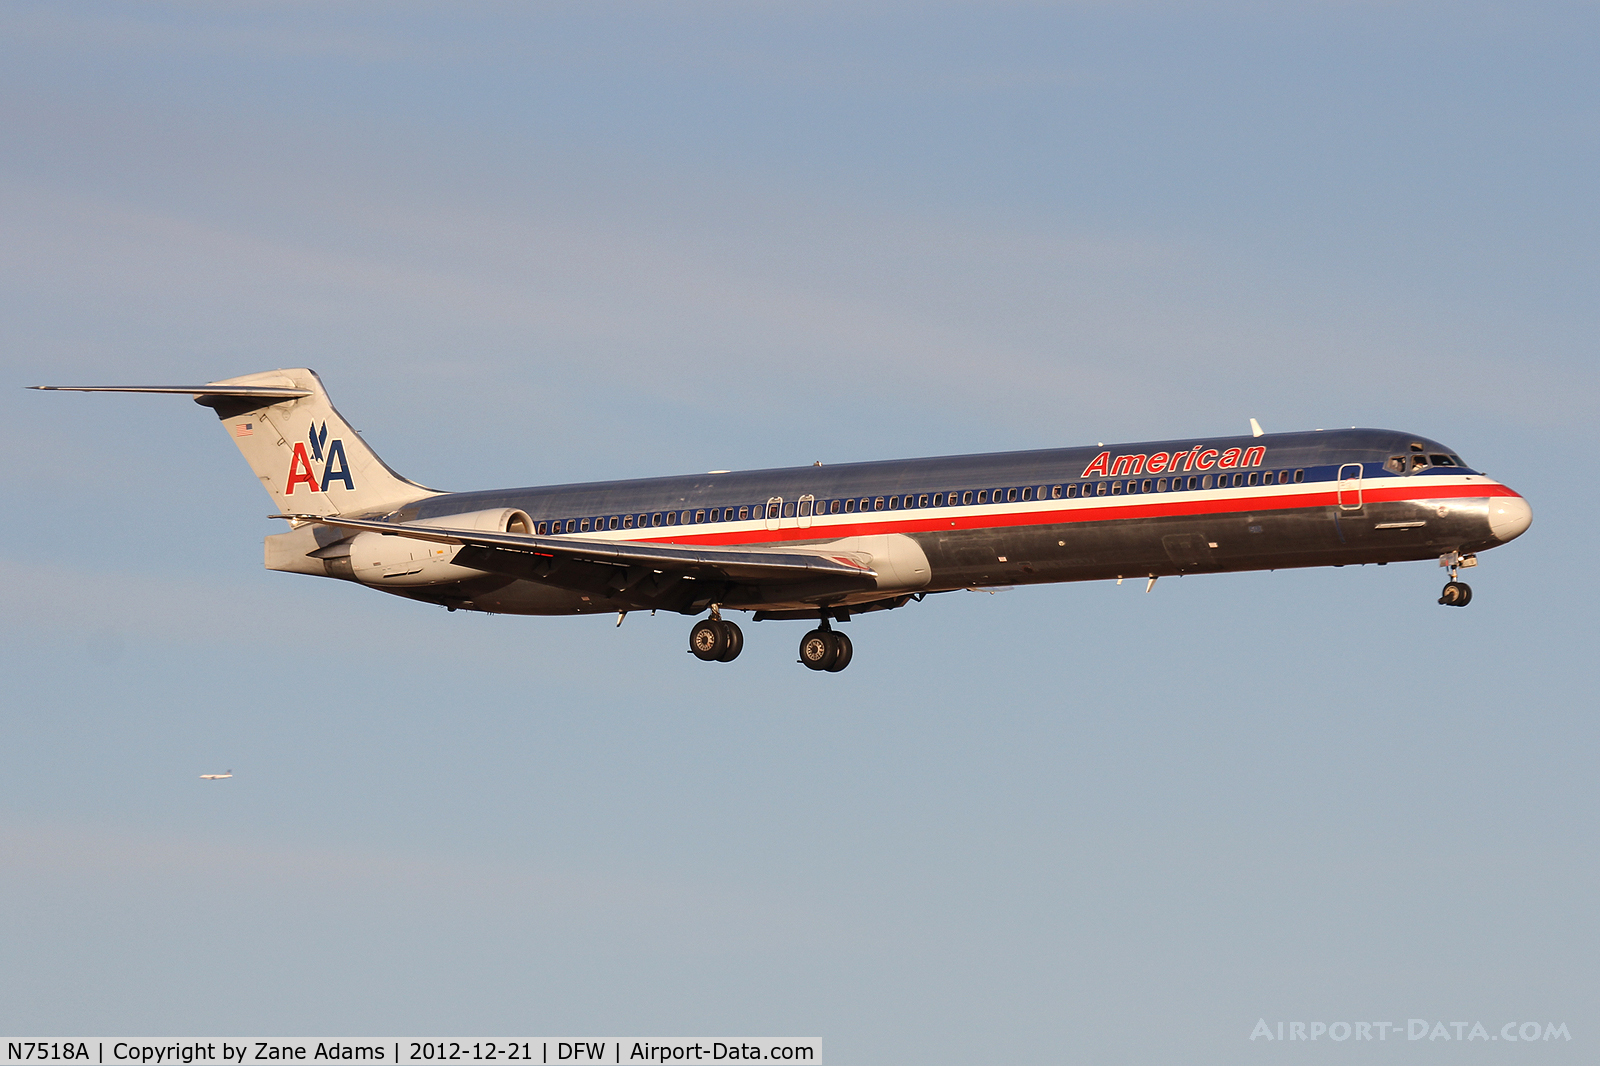 N7518A, 1990 McDonnell Douglas MD-82 (DC-9-82) C/N 49895, American Airlines at DFW Airport